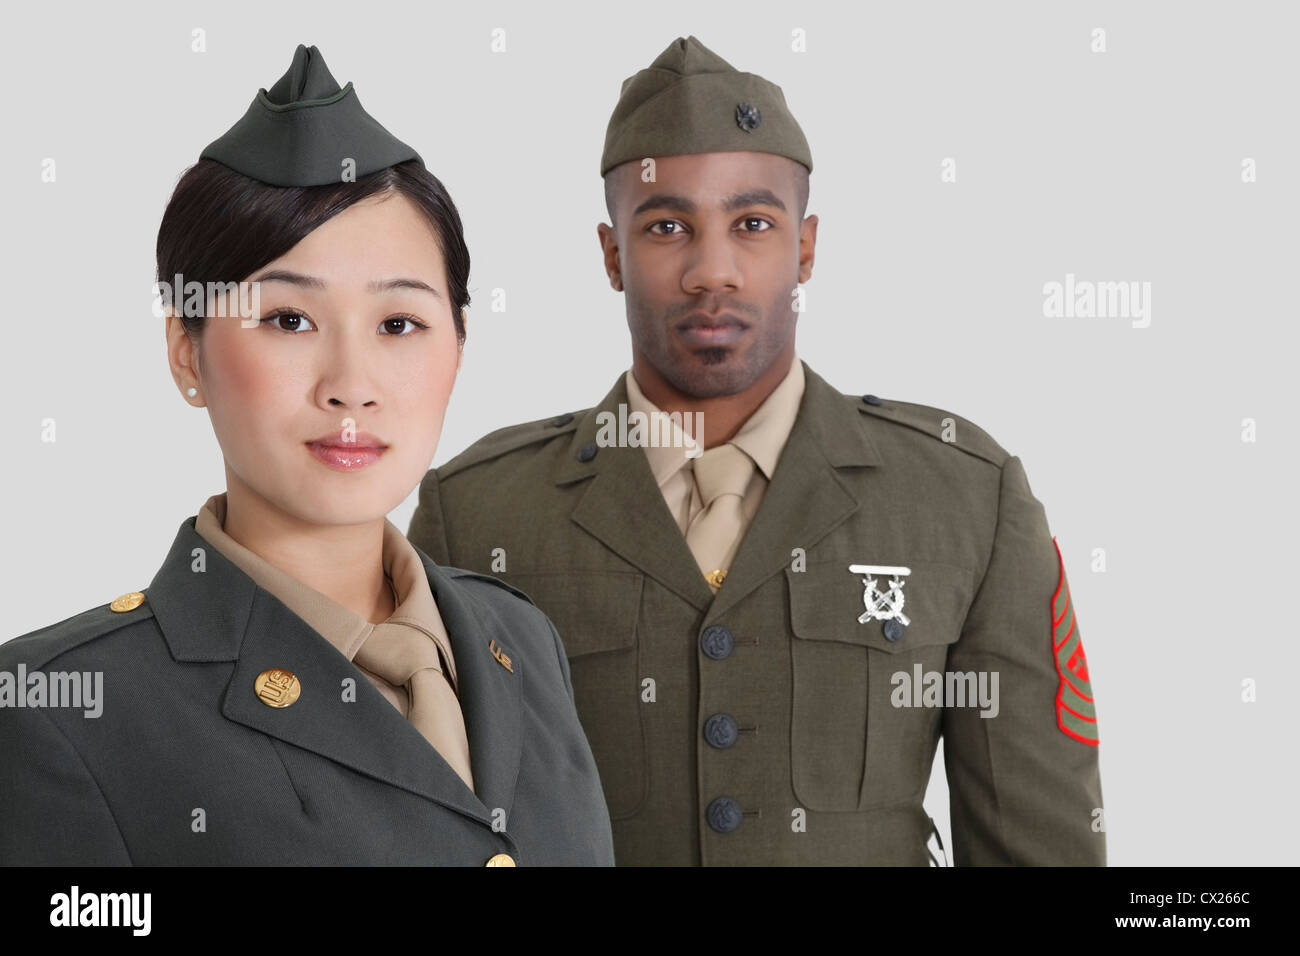 Portrait of young US military officers in uniform over gray background Stock Photo